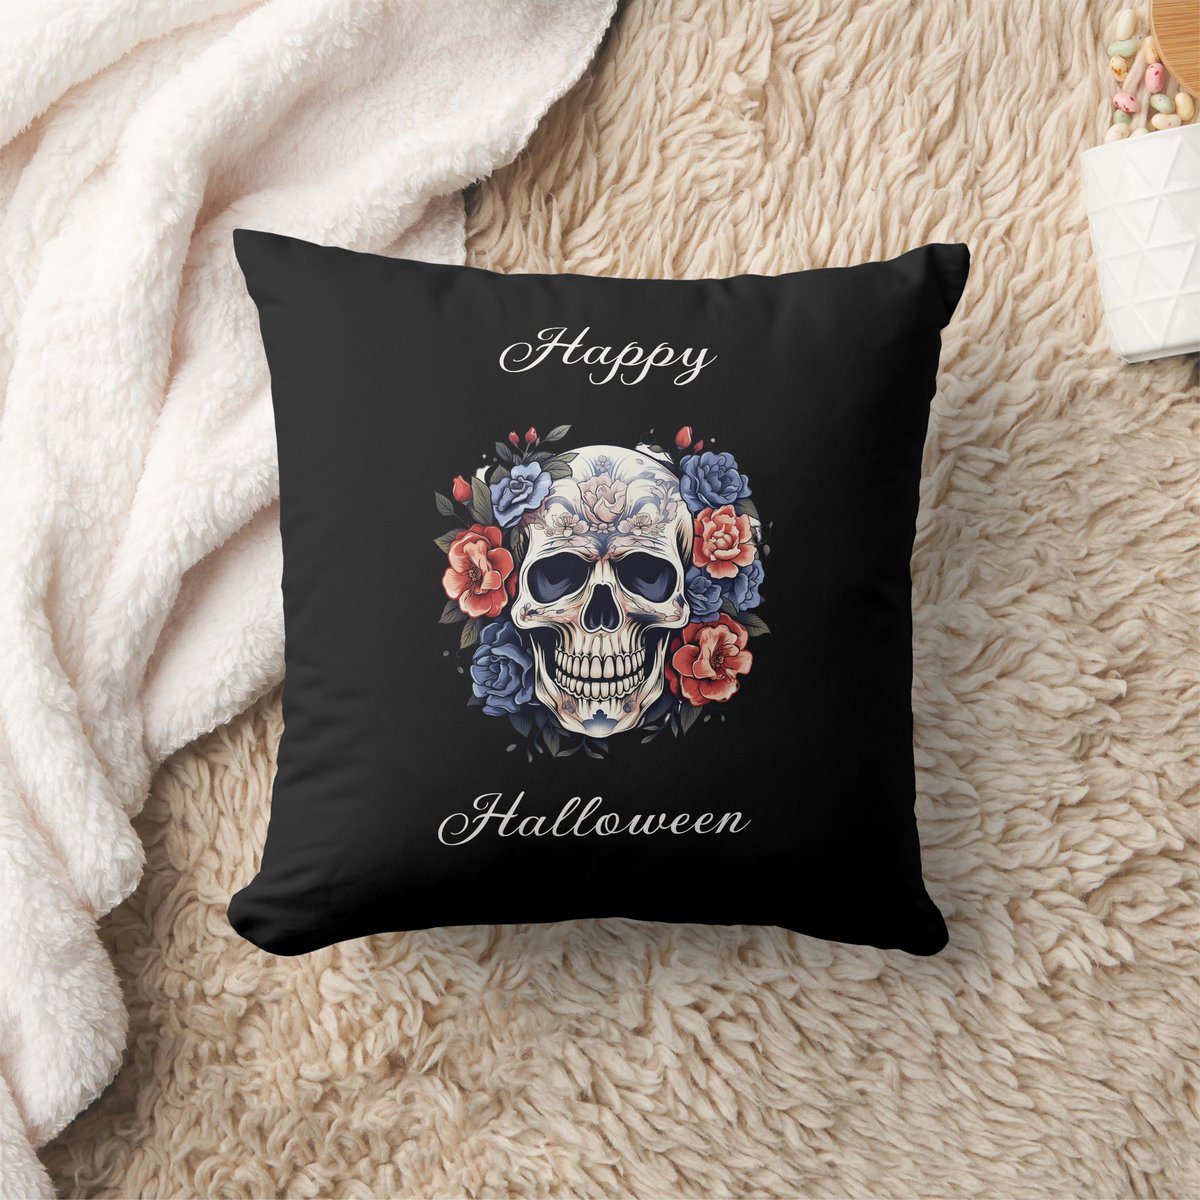 💀 Skull Design Pillows ☠️ zazzle.com/z/aumel2l3?rf=… via @zazzle #SkullDesignPillows #HomeDecor #InteriorDesign #UniquePillows  #GothicDecor #StatementPillows #ChicStyle #HomeAccents #ZazzleProducts  #HomeStyling #SkullArt #DecorateWithStyle #HomeInspiration #CozyNights